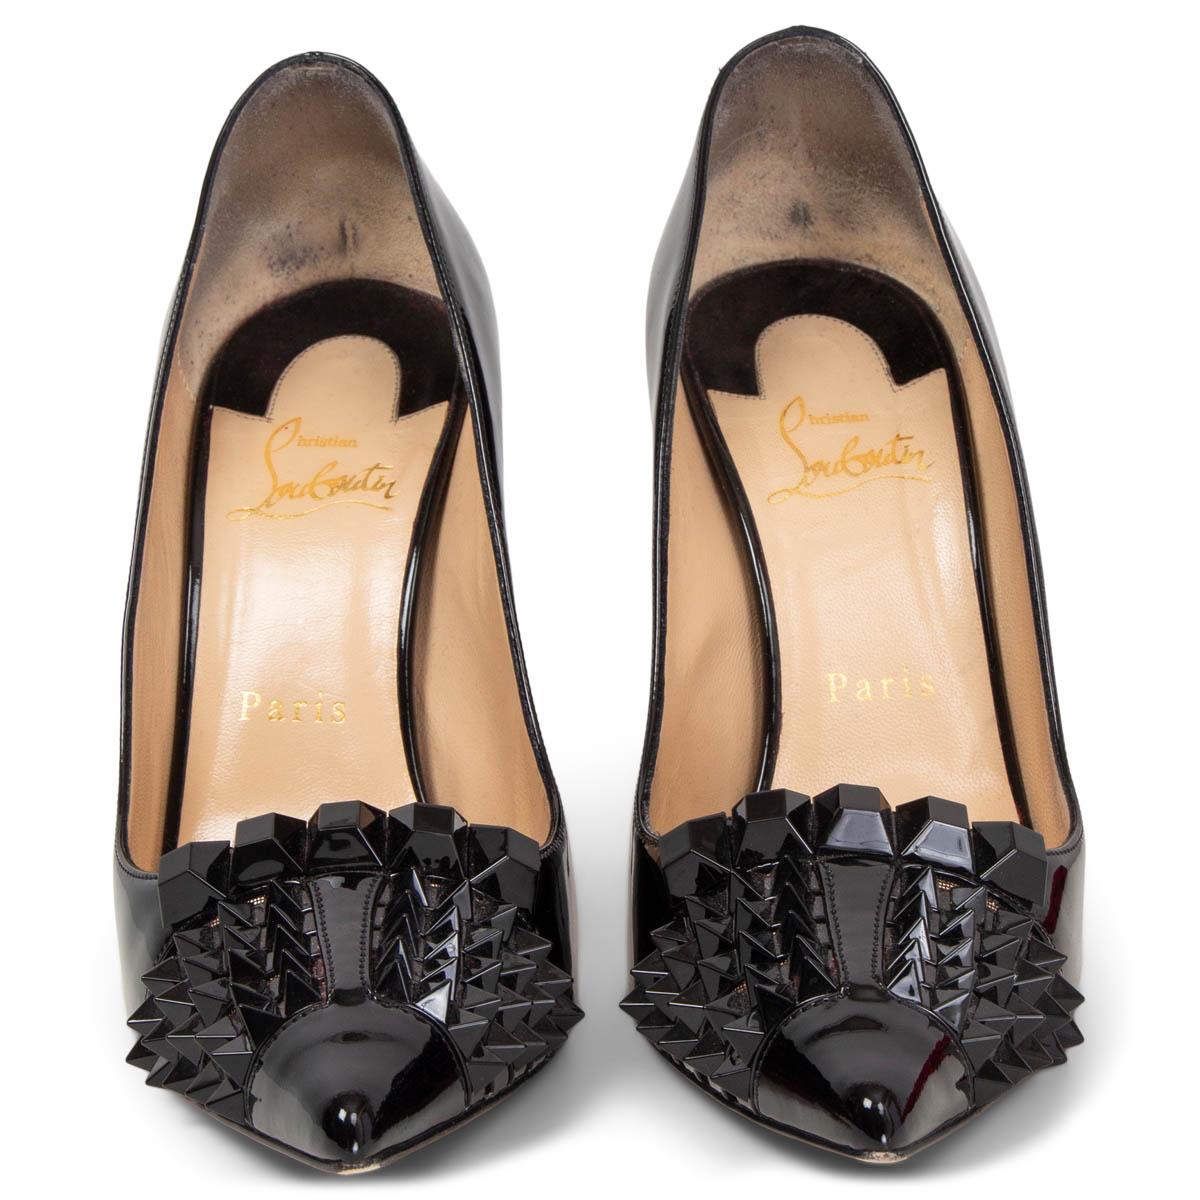 100% authentic Christian Louboutin spiked cap toe pumps in black patent leather and a pointed-toe. Have been worn and are in excellent condition. Come with dust bag. 

Measurements
Imprinted Size	37.5
Shoe Size	37.5
Inside Sole	24.5cm